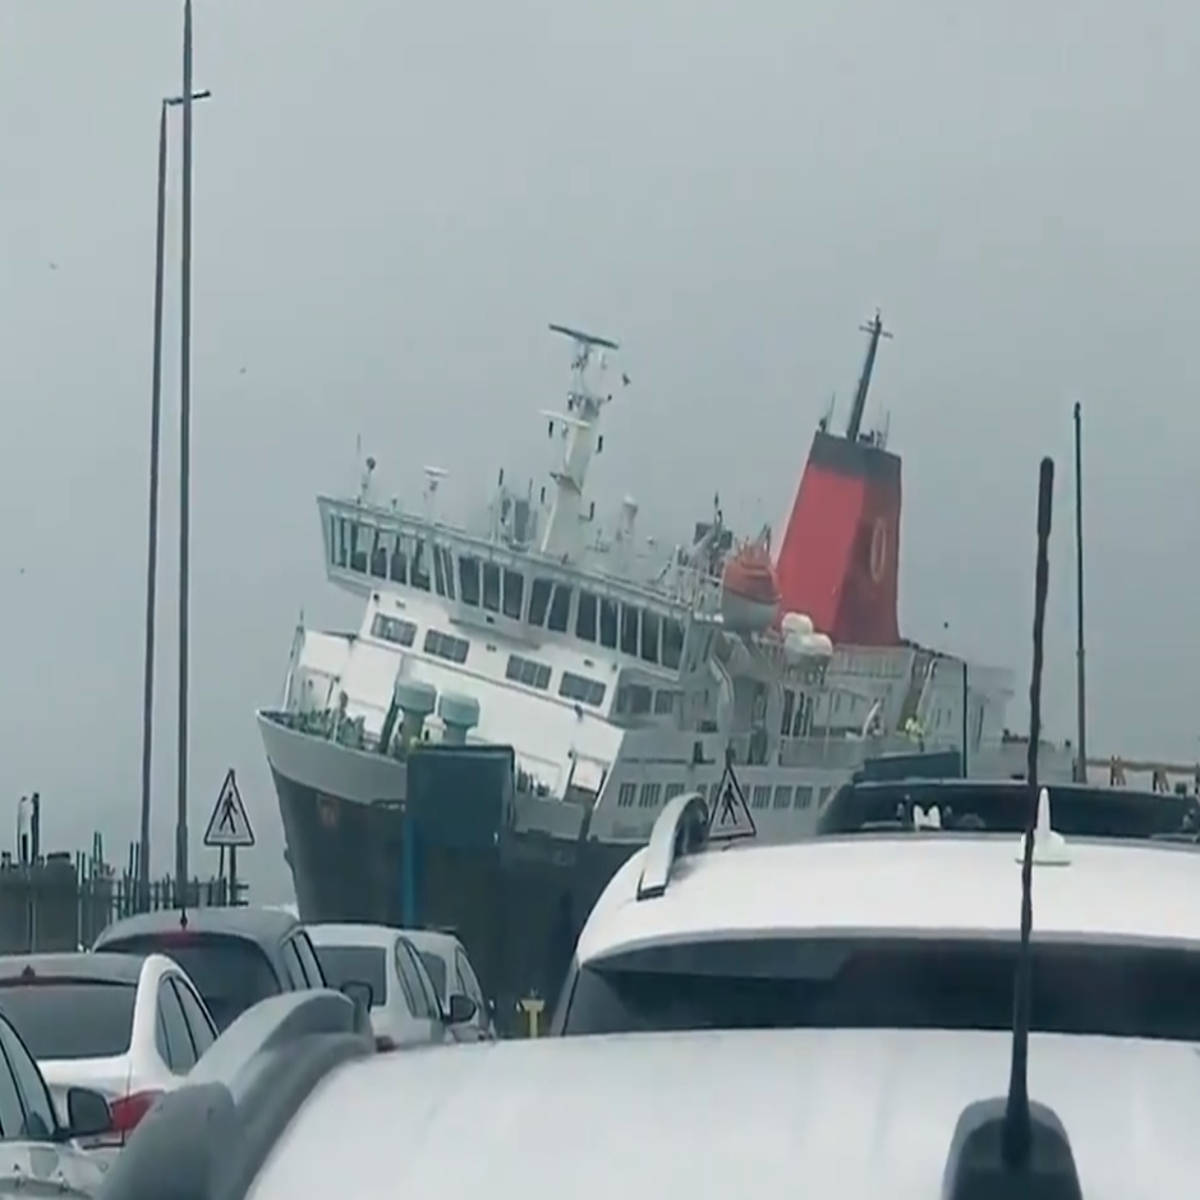 Stormy Dennis Sex Videos - Storm Dennis: Ferry struggles to dock in dramatic video | The Independent |  The Independent